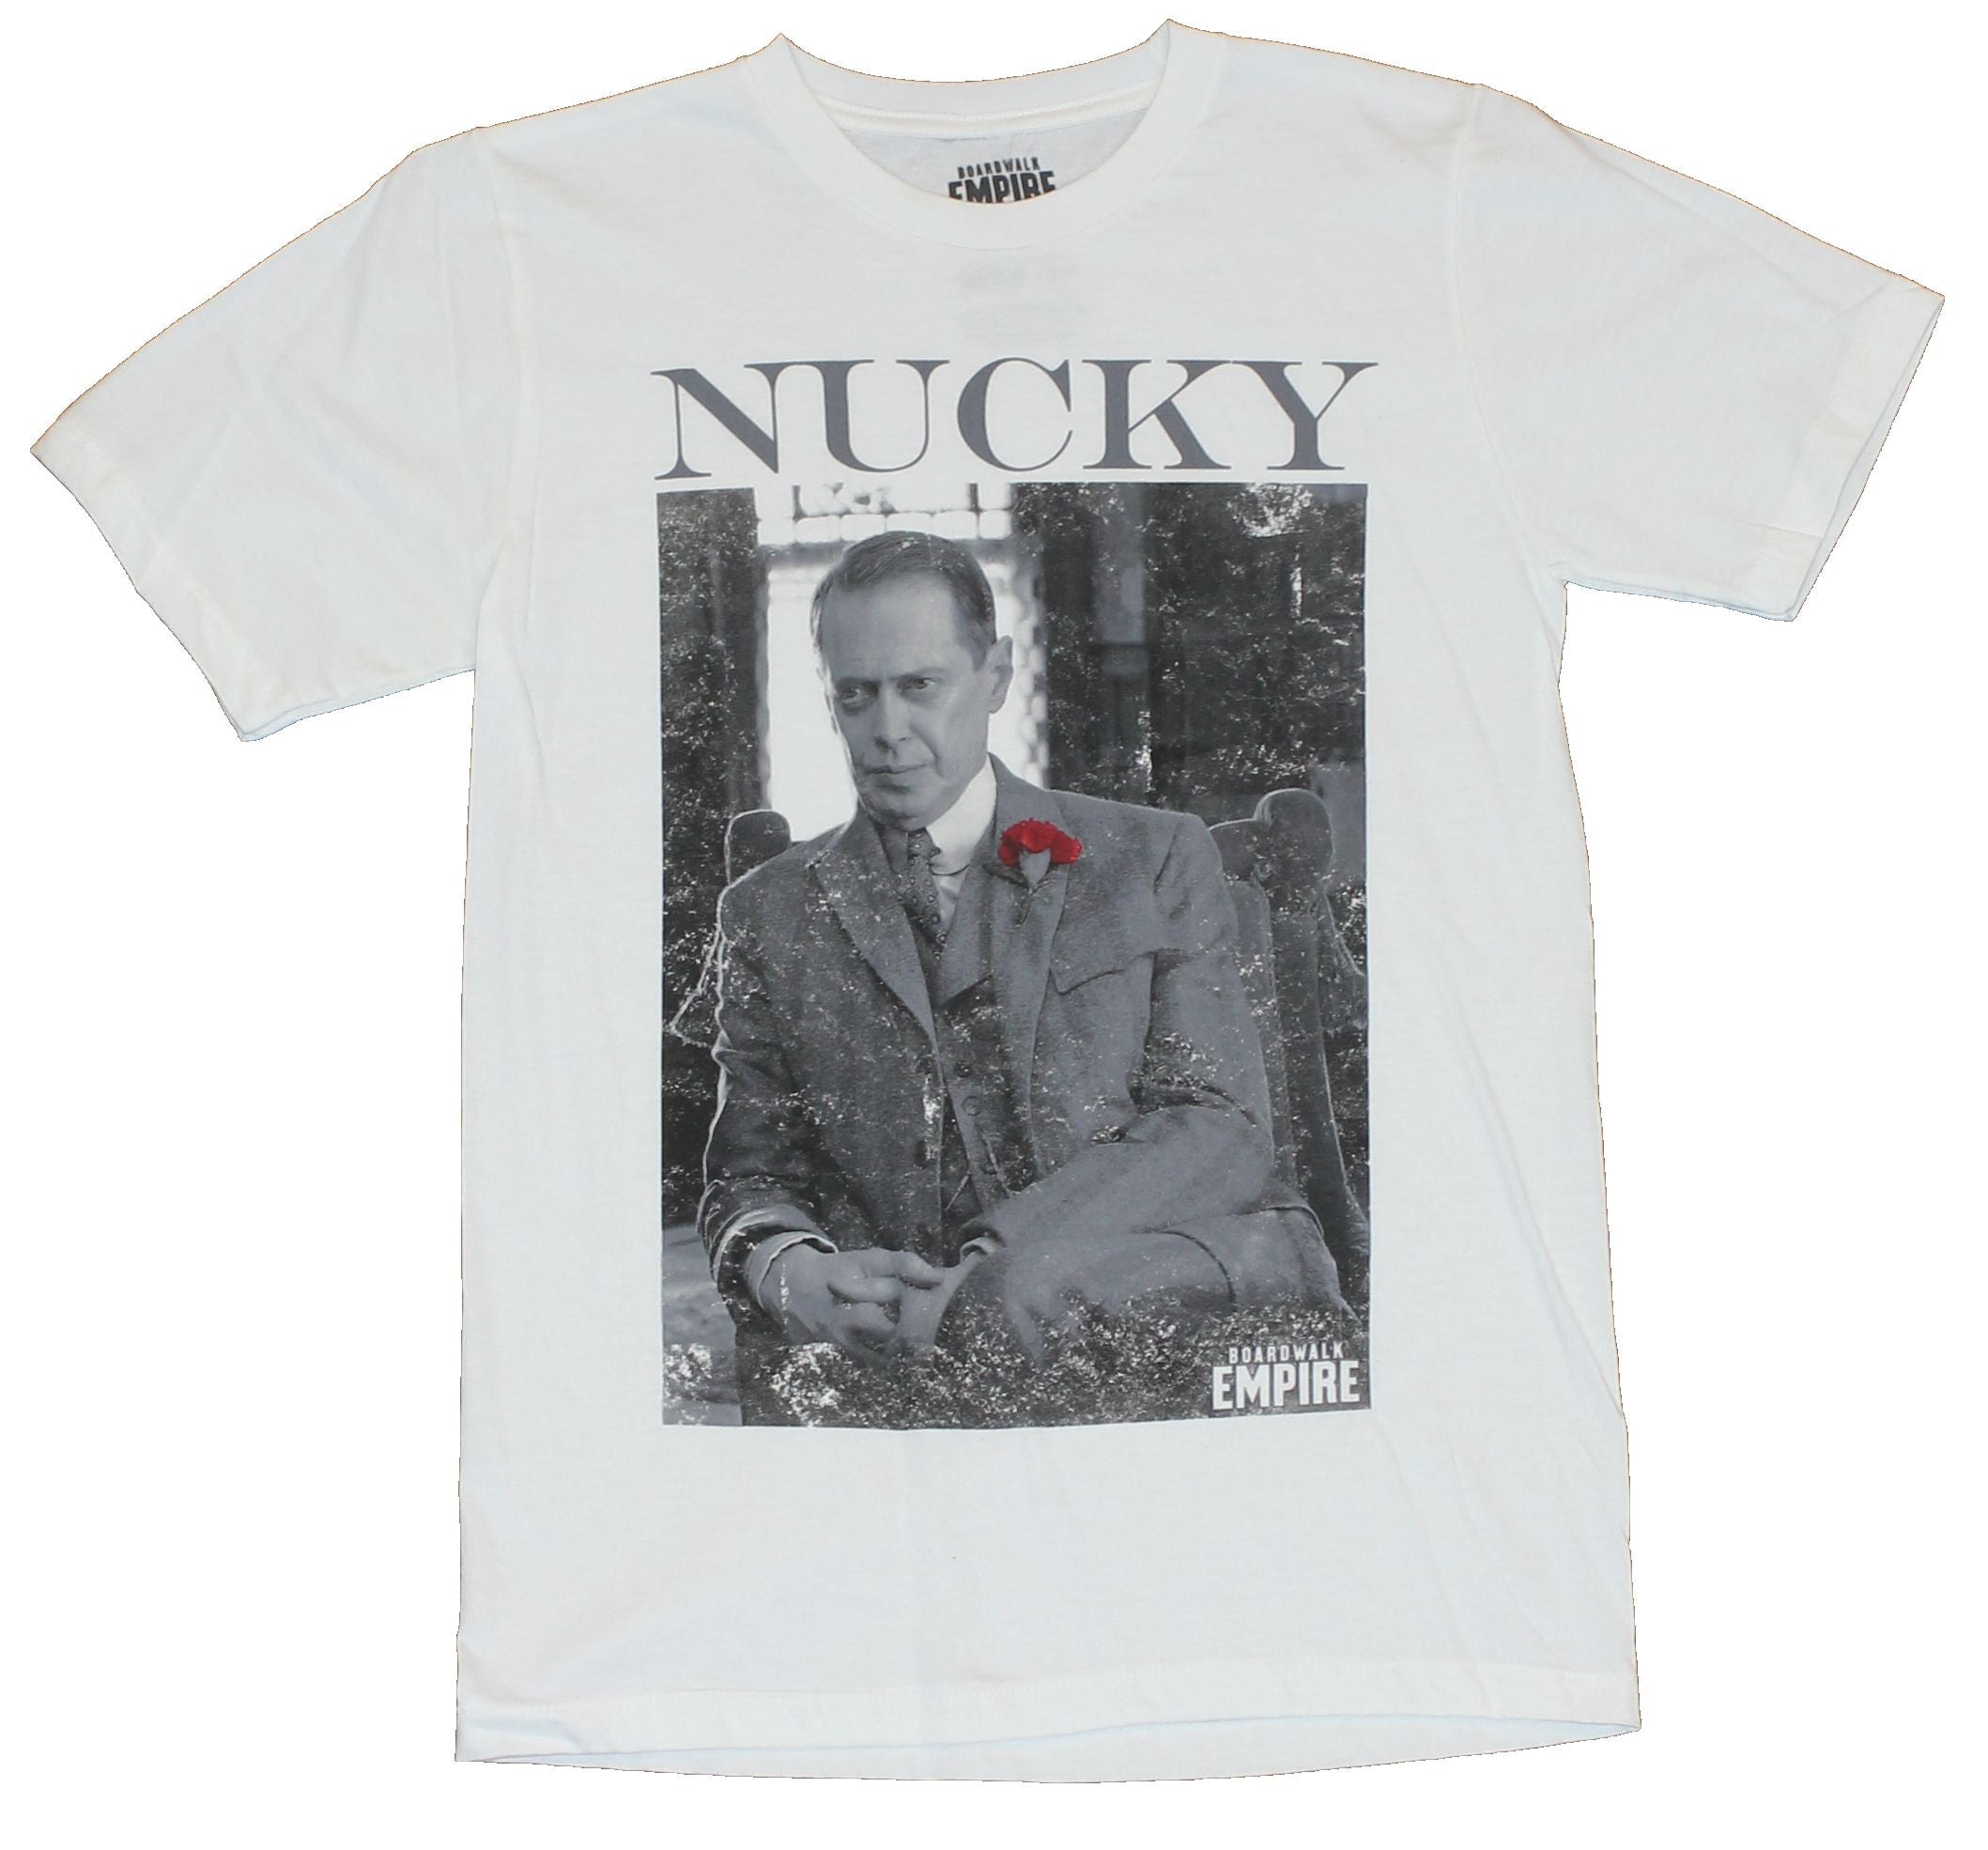 Boardwalk Empire Mens T-Shirt - "Nucky" Cracked Distressed Photo Image